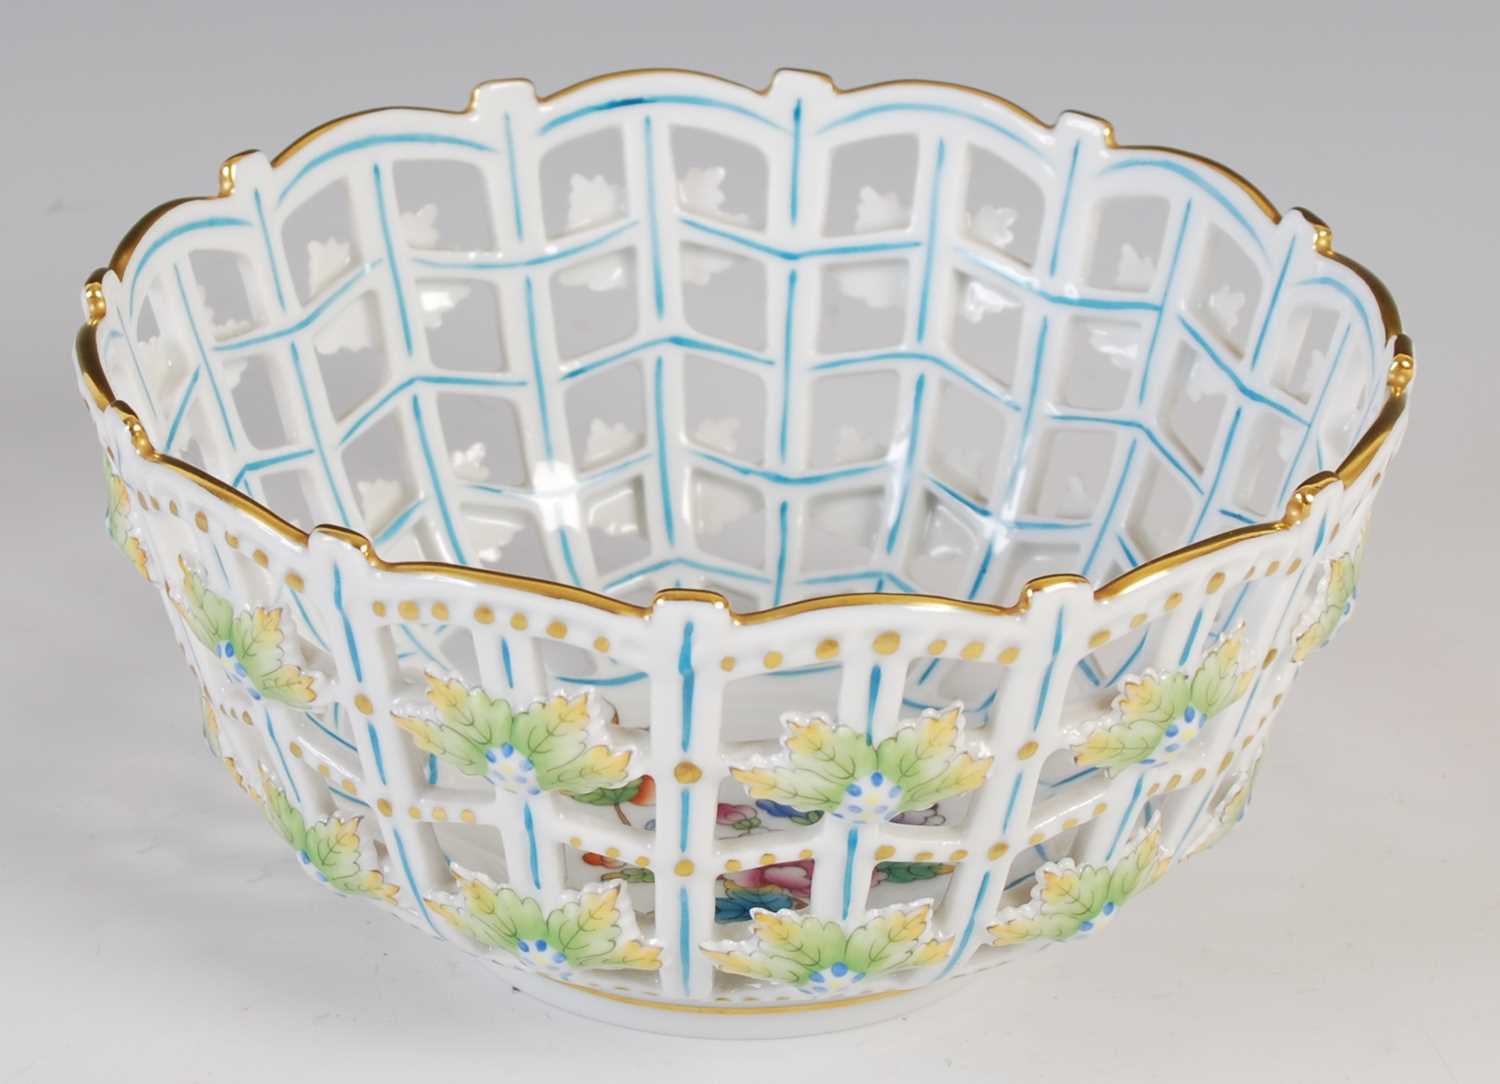 A Herend porcelain basket, 20th century, decorated with floral spray to the interior, the exterior